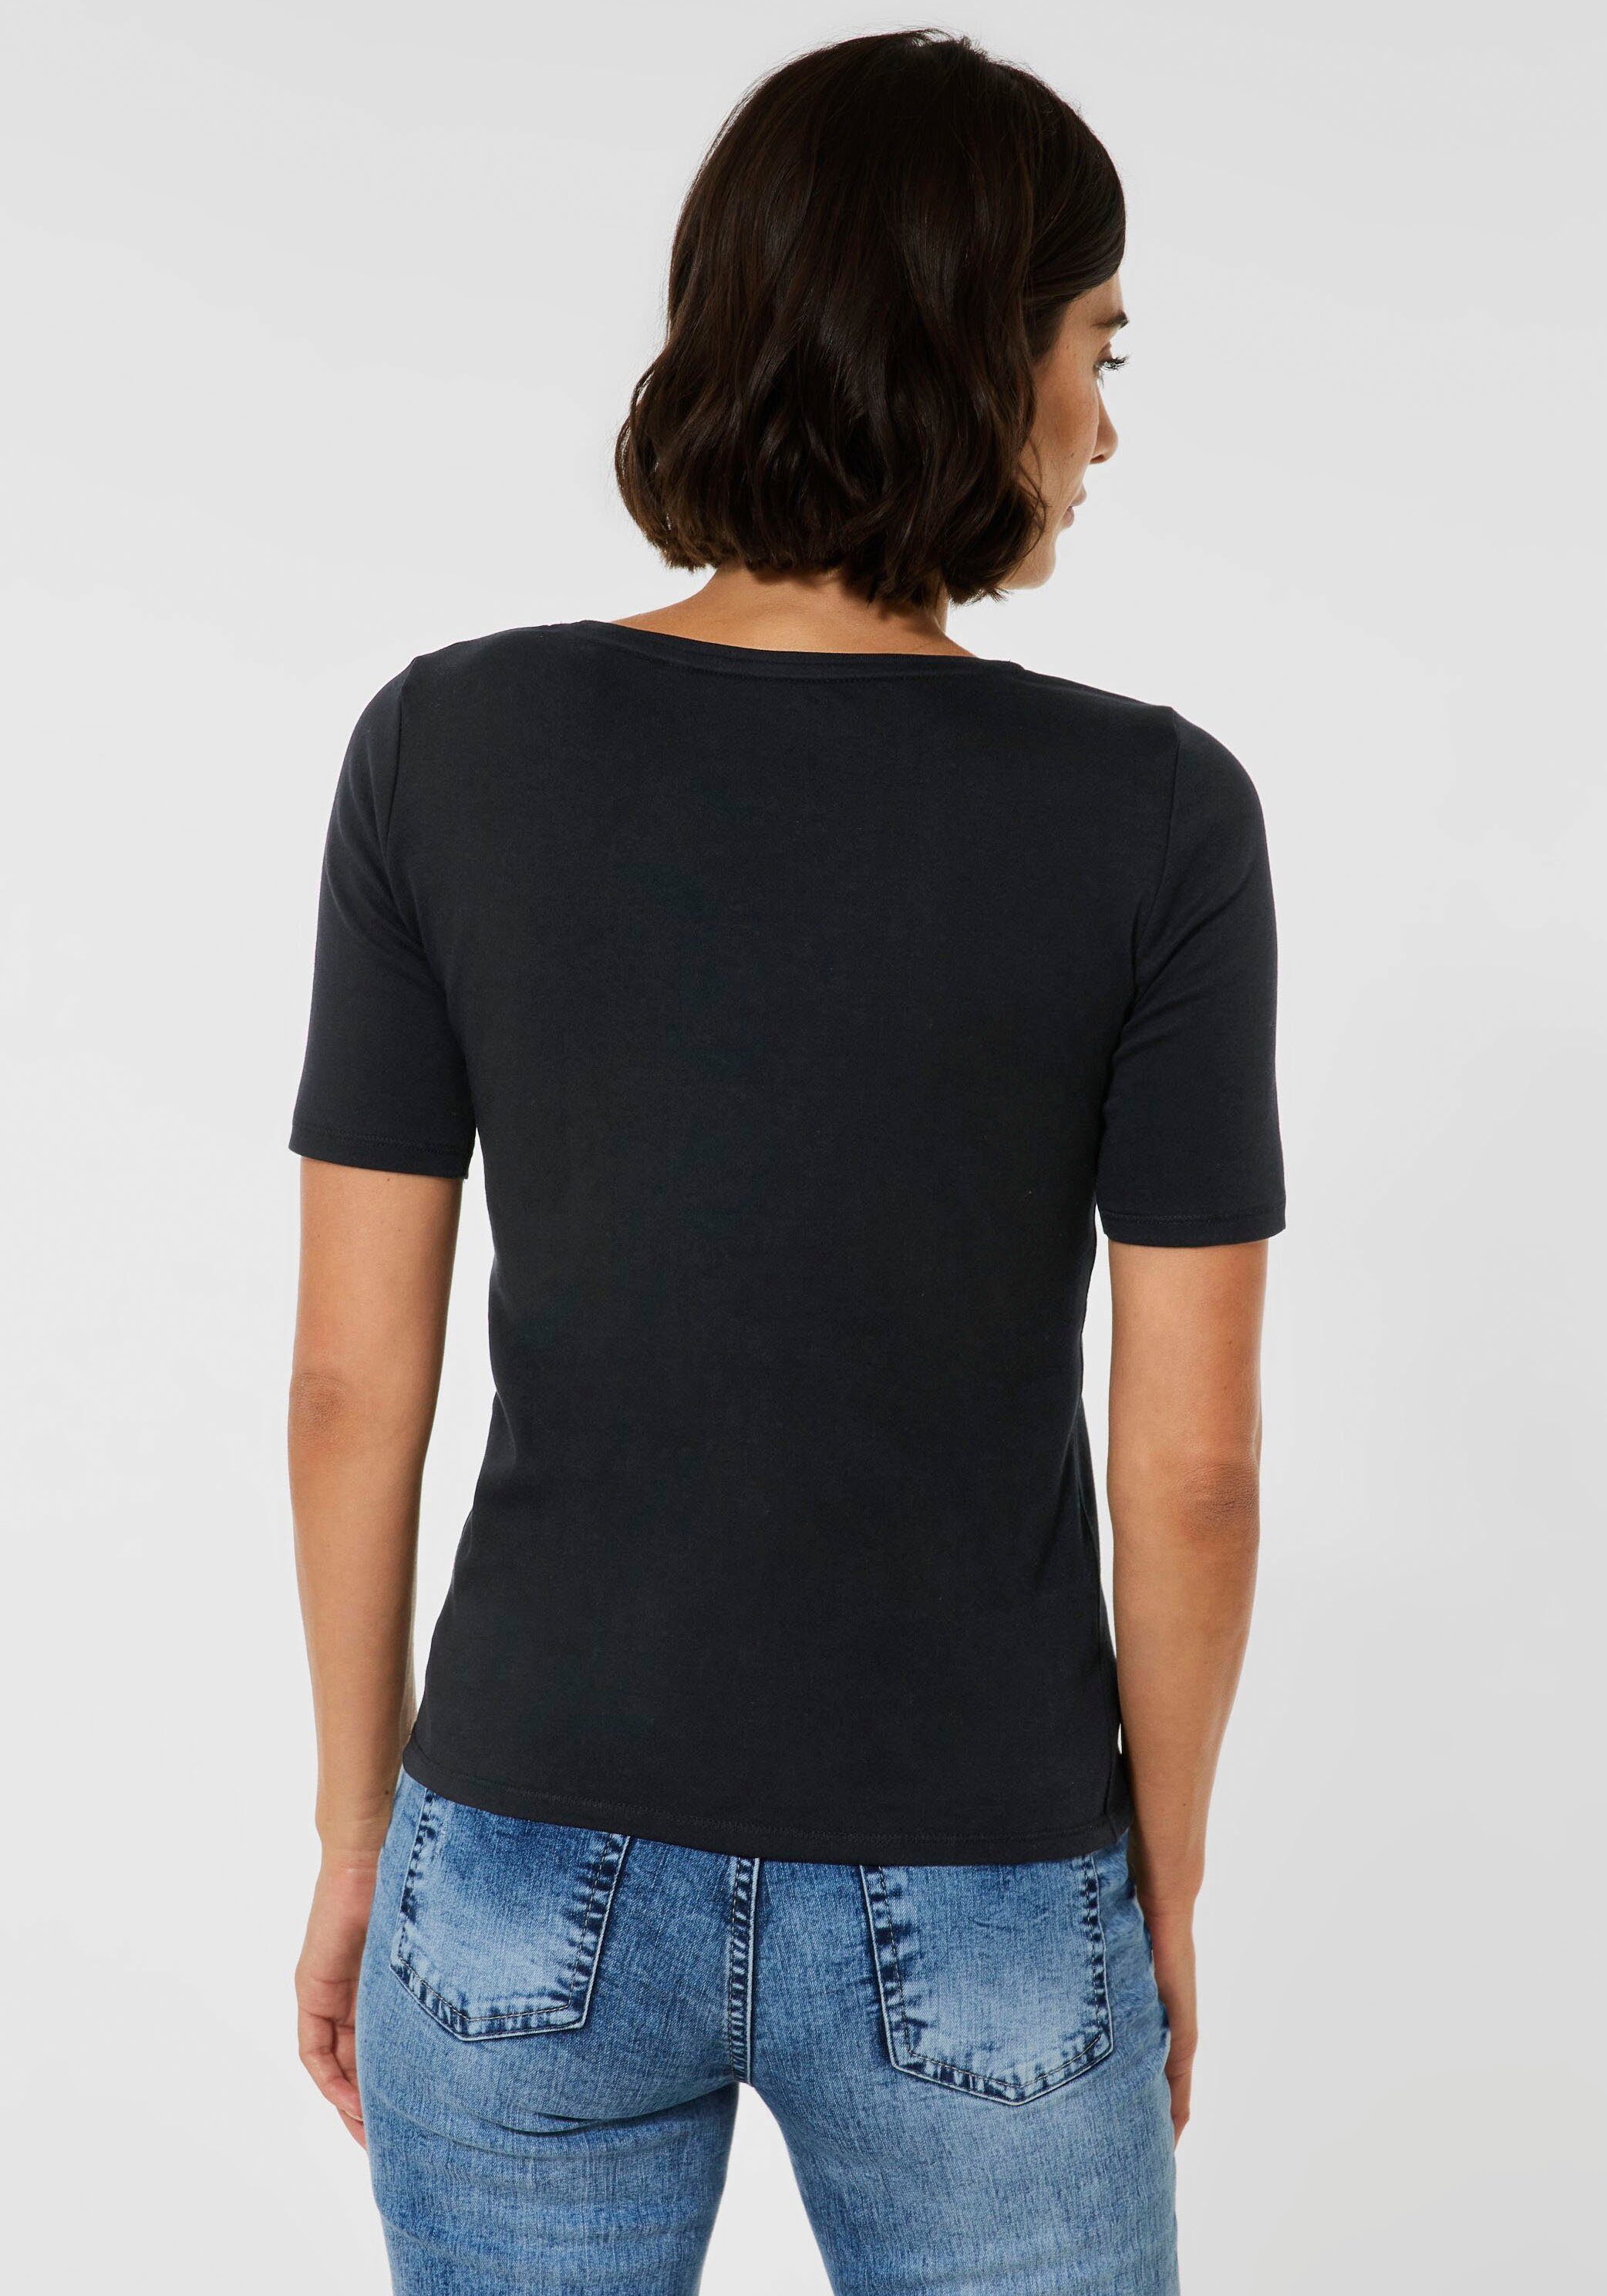 Unifarbe Black Lena Cecil Style T-Shirt in